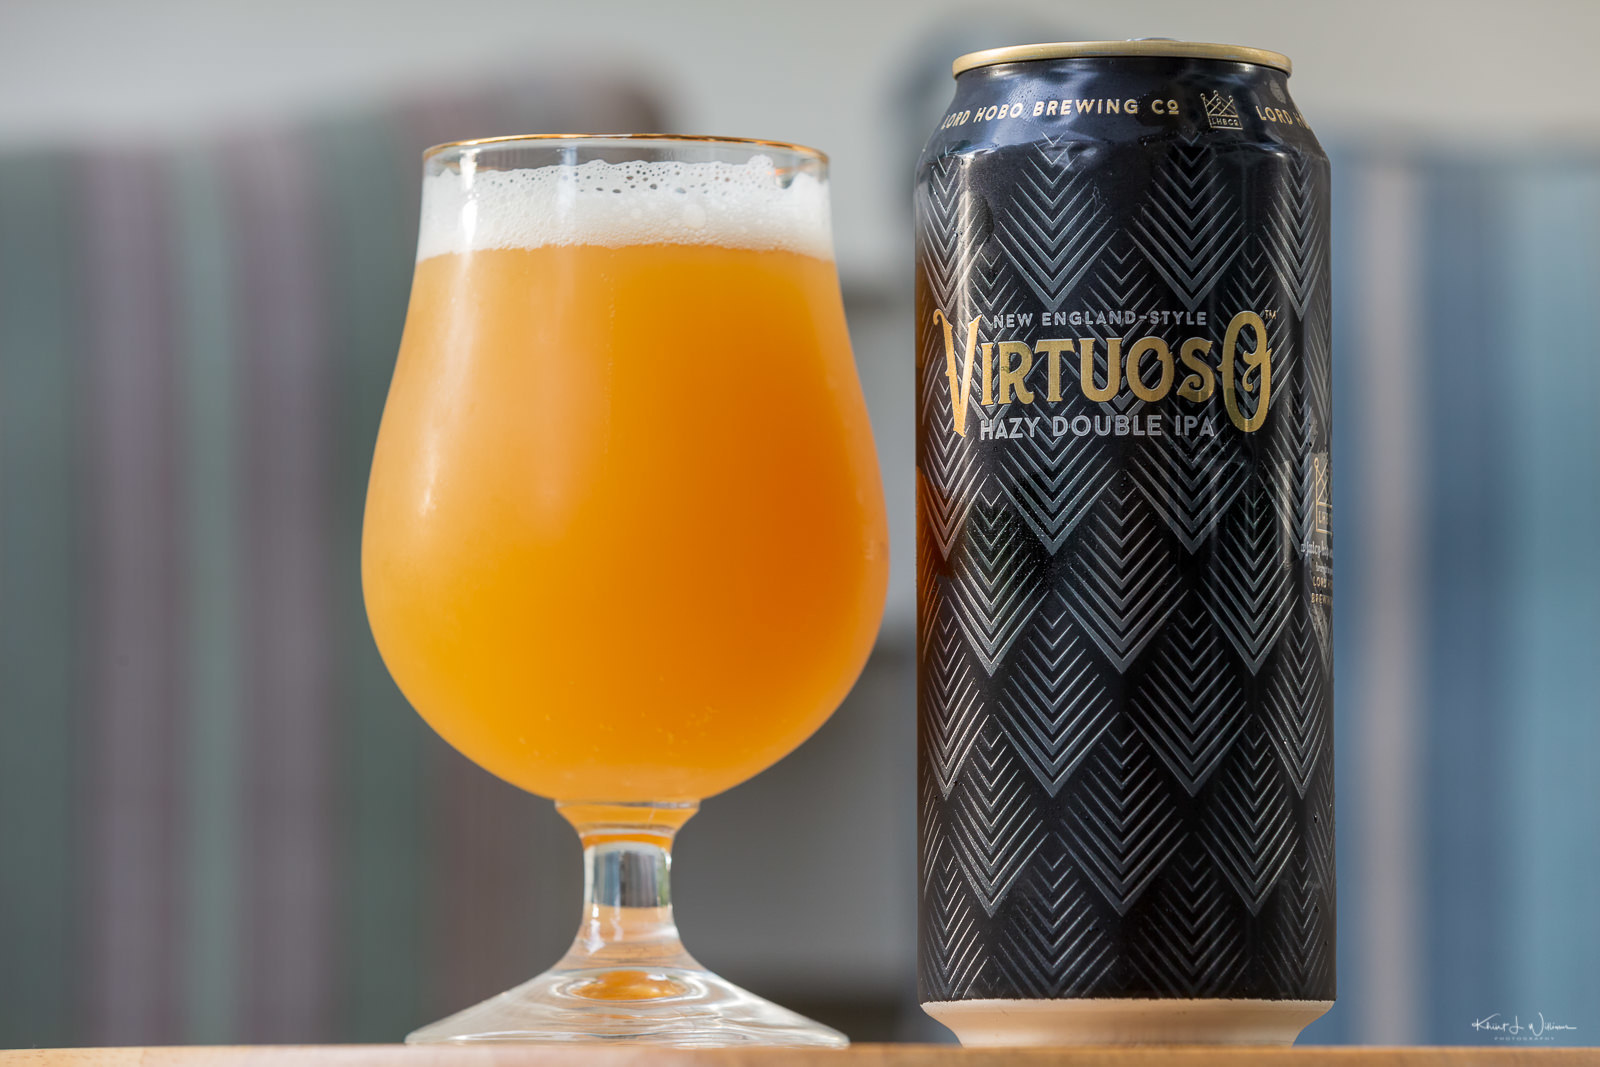 Lord Hobo Brewing Co.'s Virtuoso